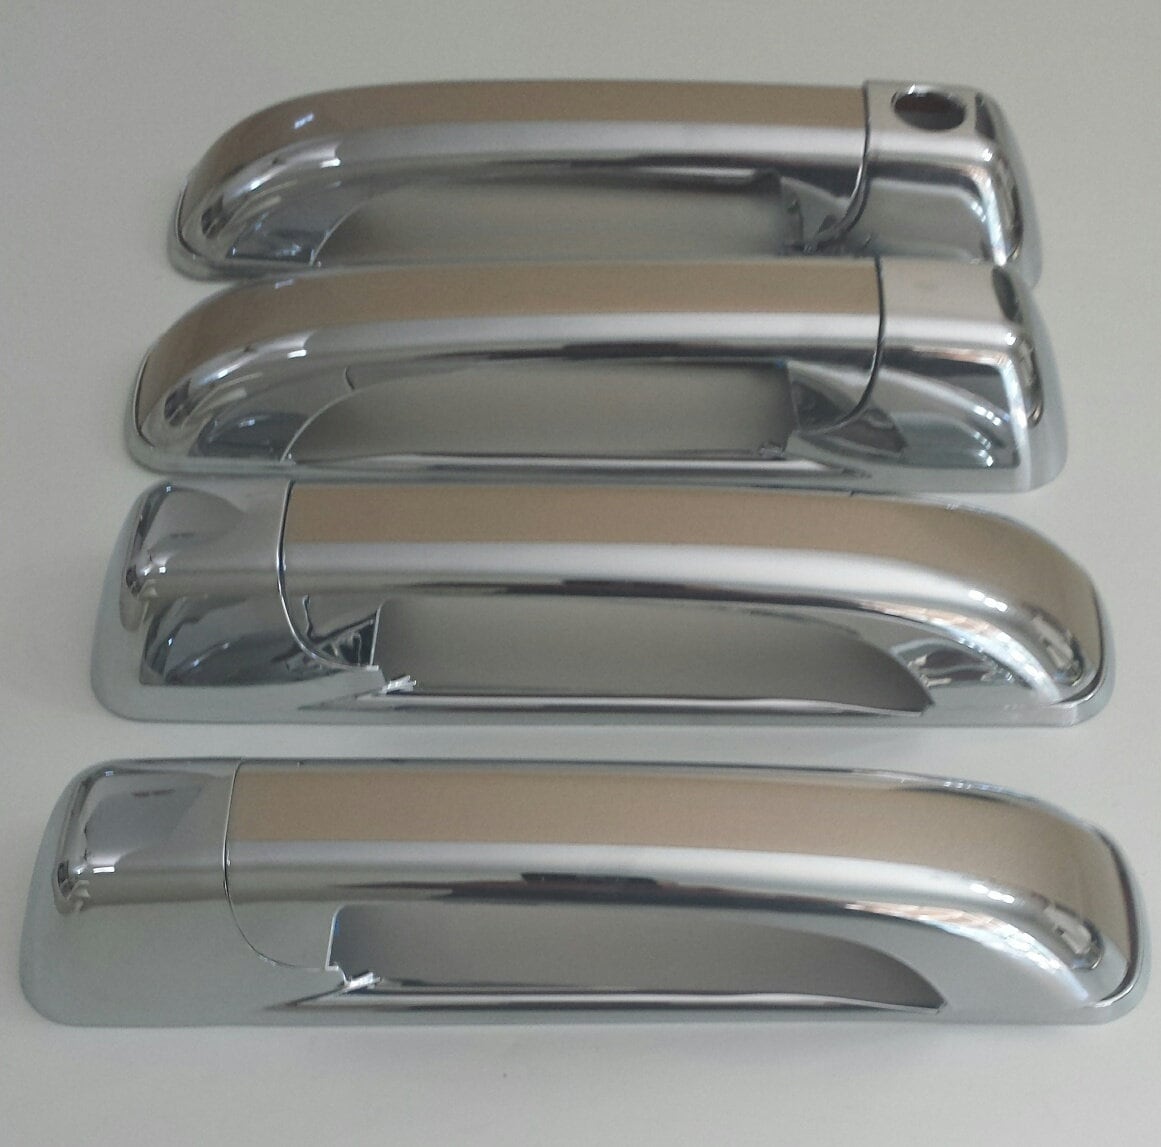 Full Set of Custom Black OR Chrome Door Handle Overlays / Covers For the 2010 - 2022 Dodge Ram 2500 -- You Choose the Middle Color Insert